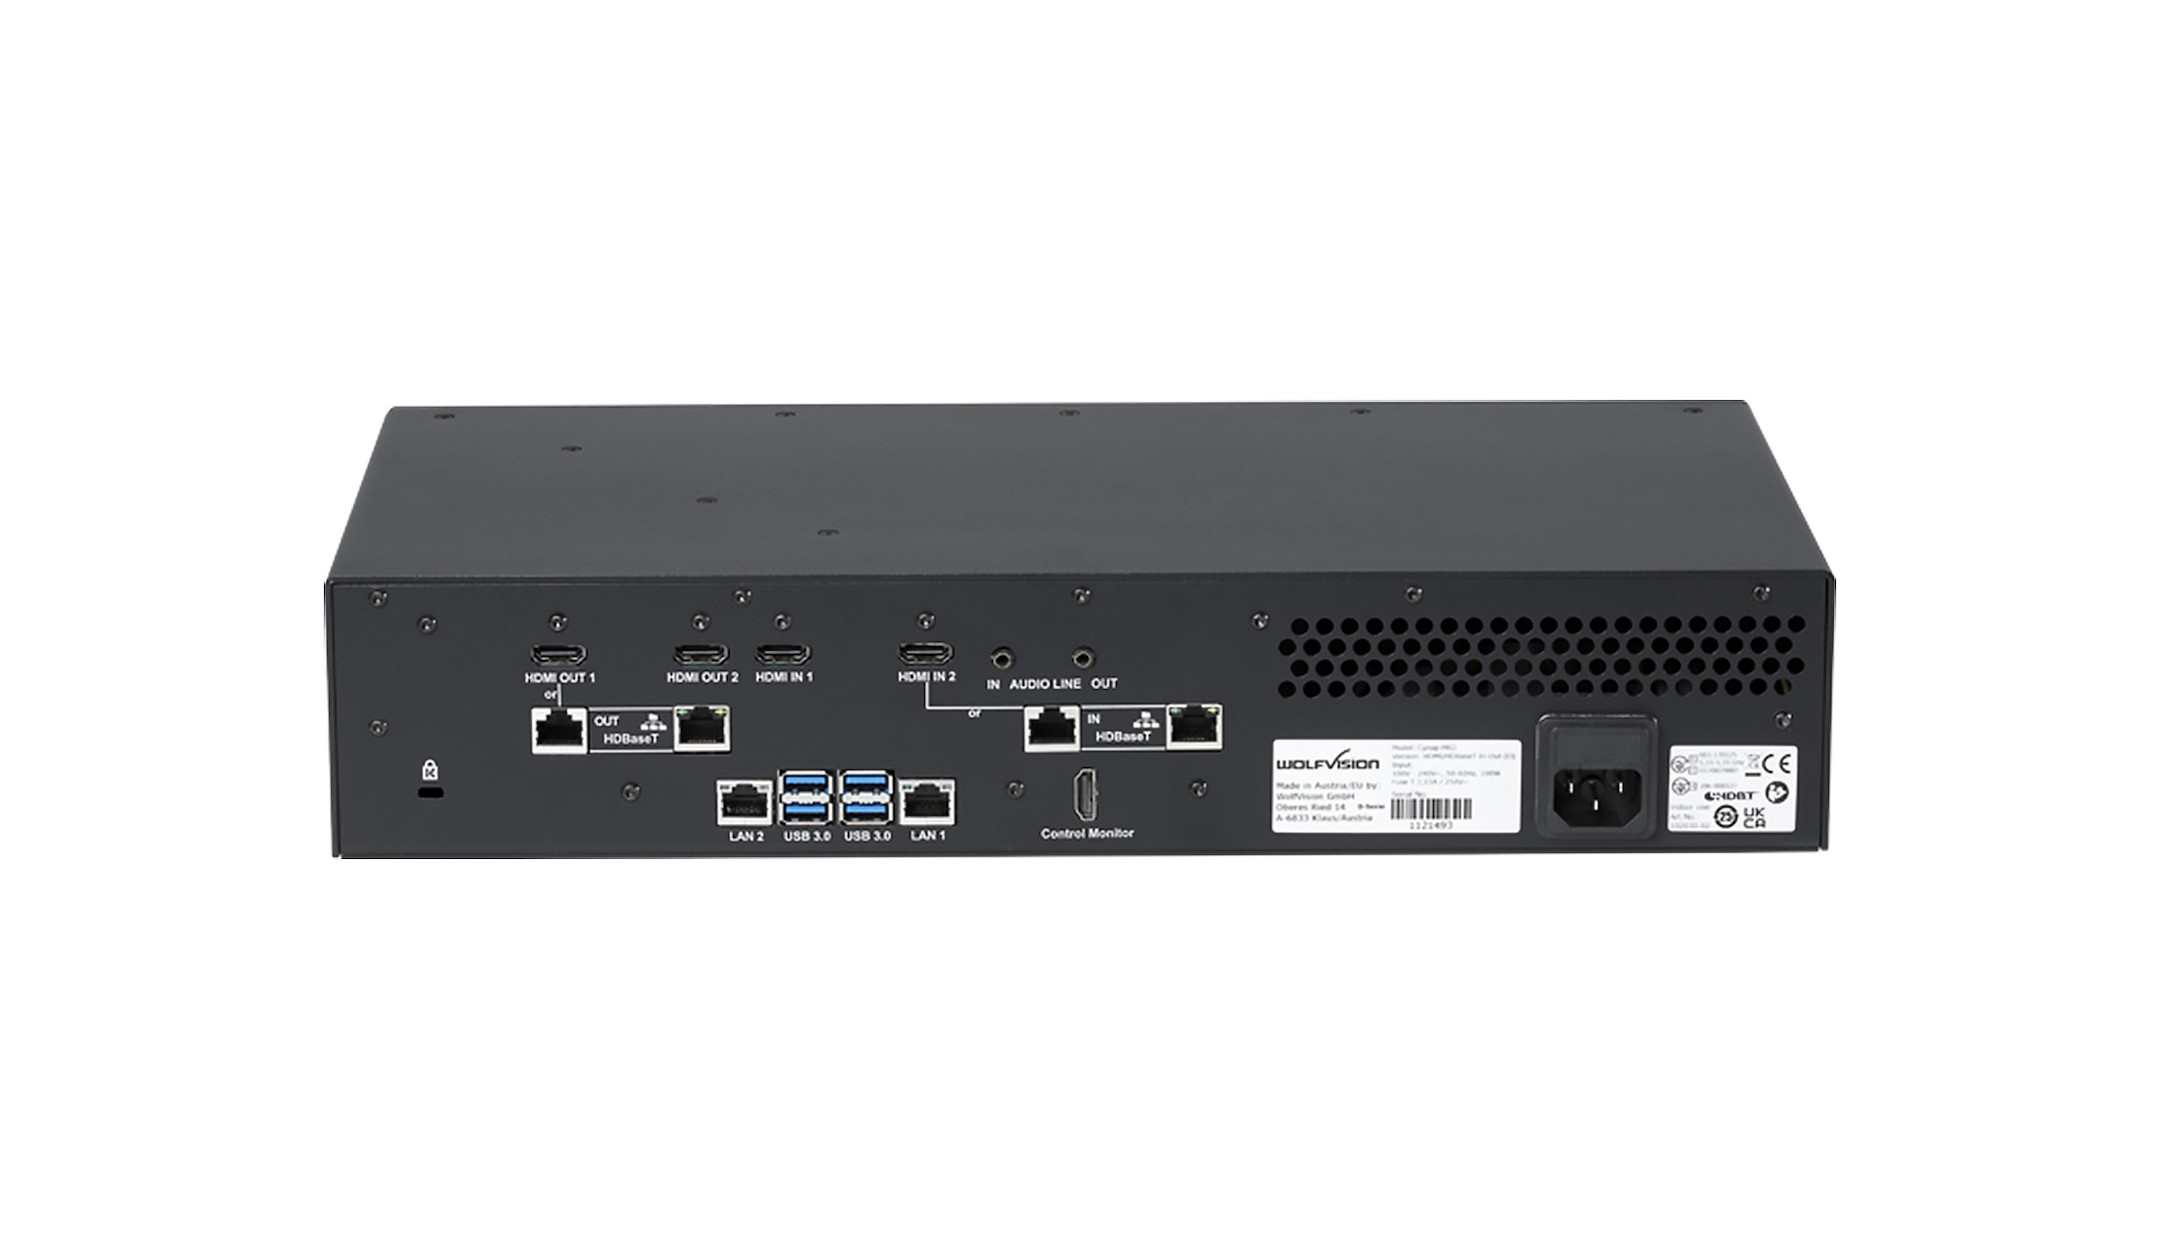 Wolfvision-Cynap-Pro-HDMI-HDBaseT-OUT-Version-C-drahtloses-All-in-One-Prasentationssystem